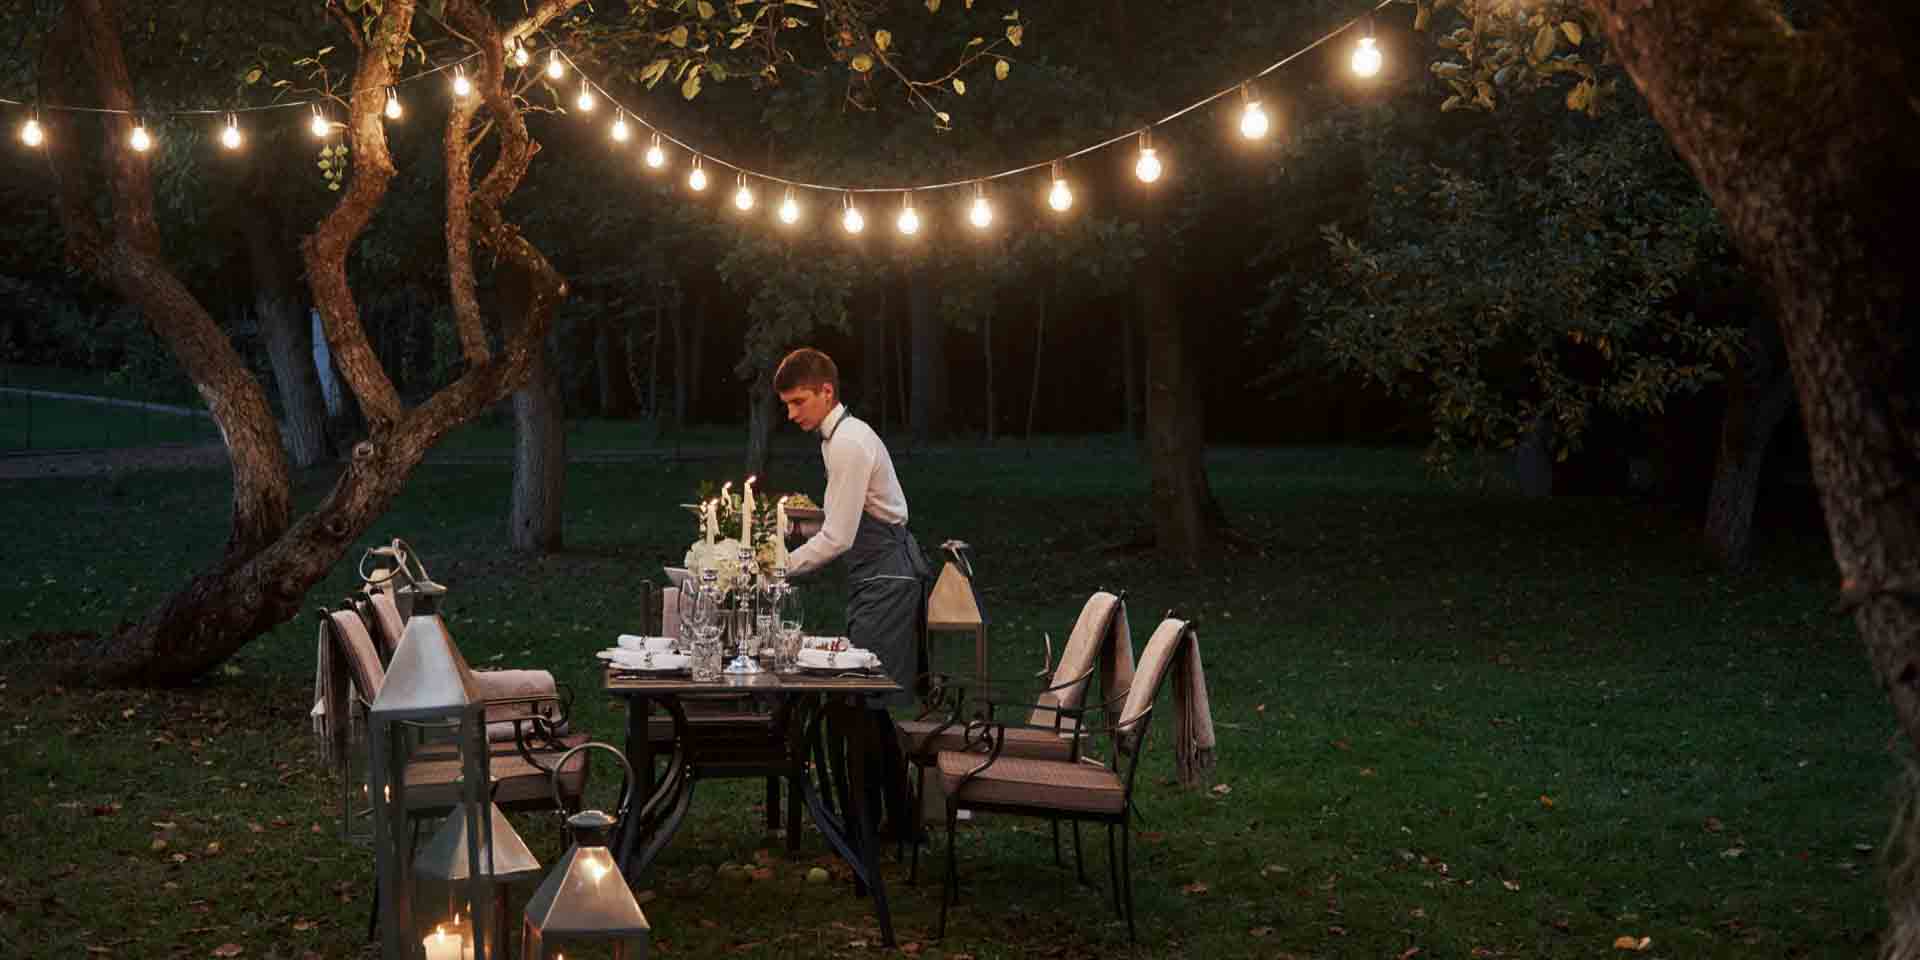 Outdoor Candle Light Dinner Ideas: Tips for a Magical Night